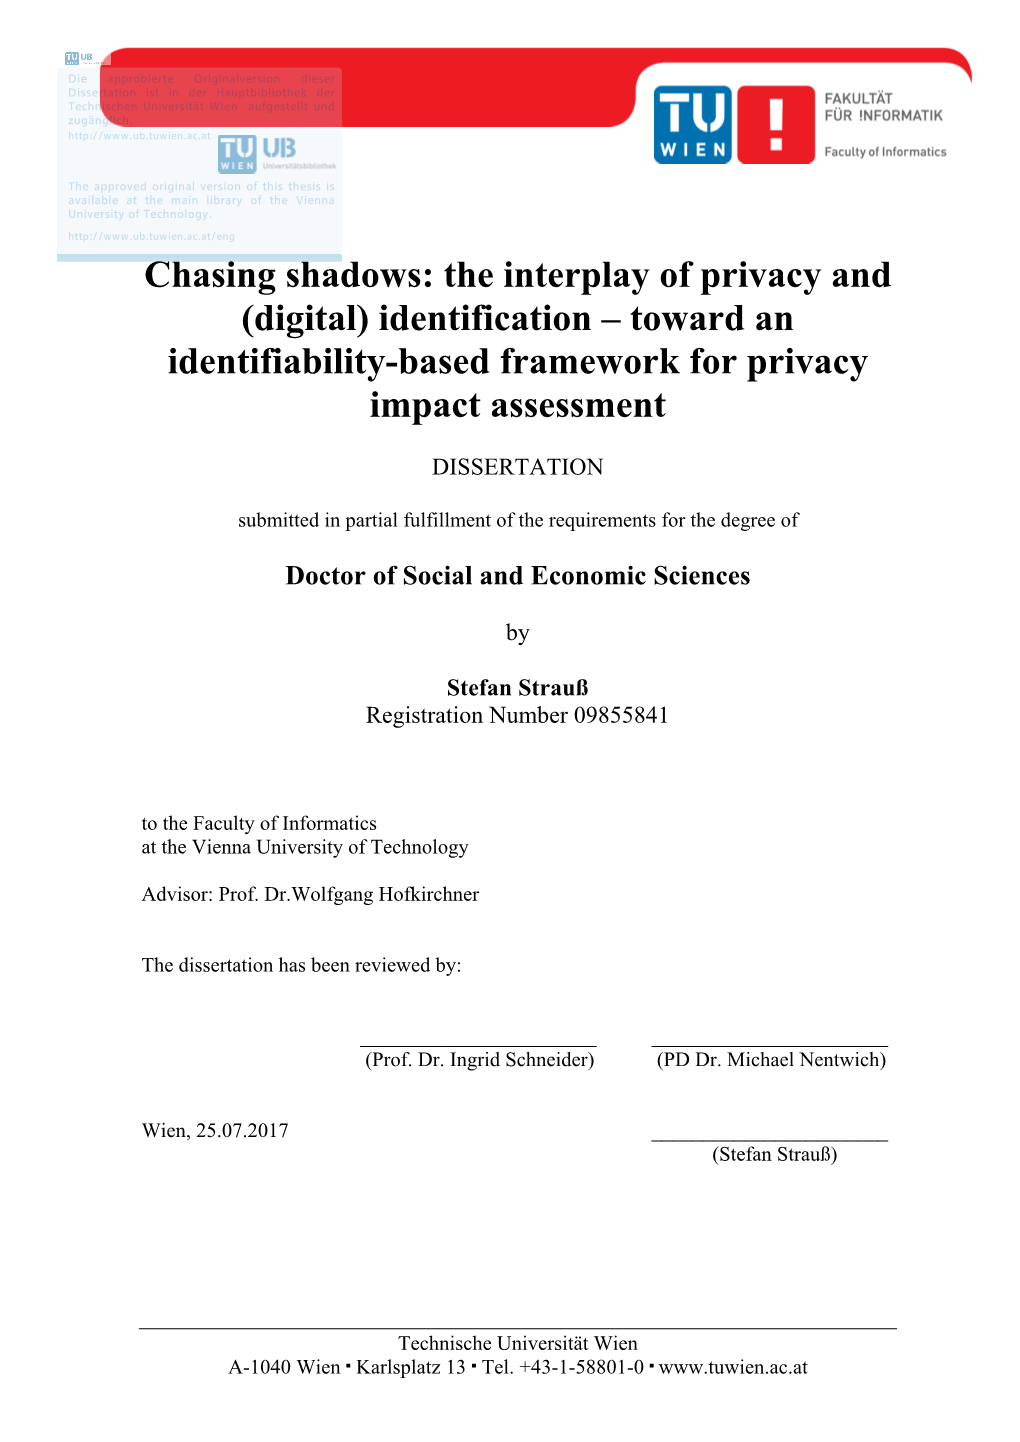 Identification – Toward an Identifiability-Based Framework for Privacy Impact Assessment